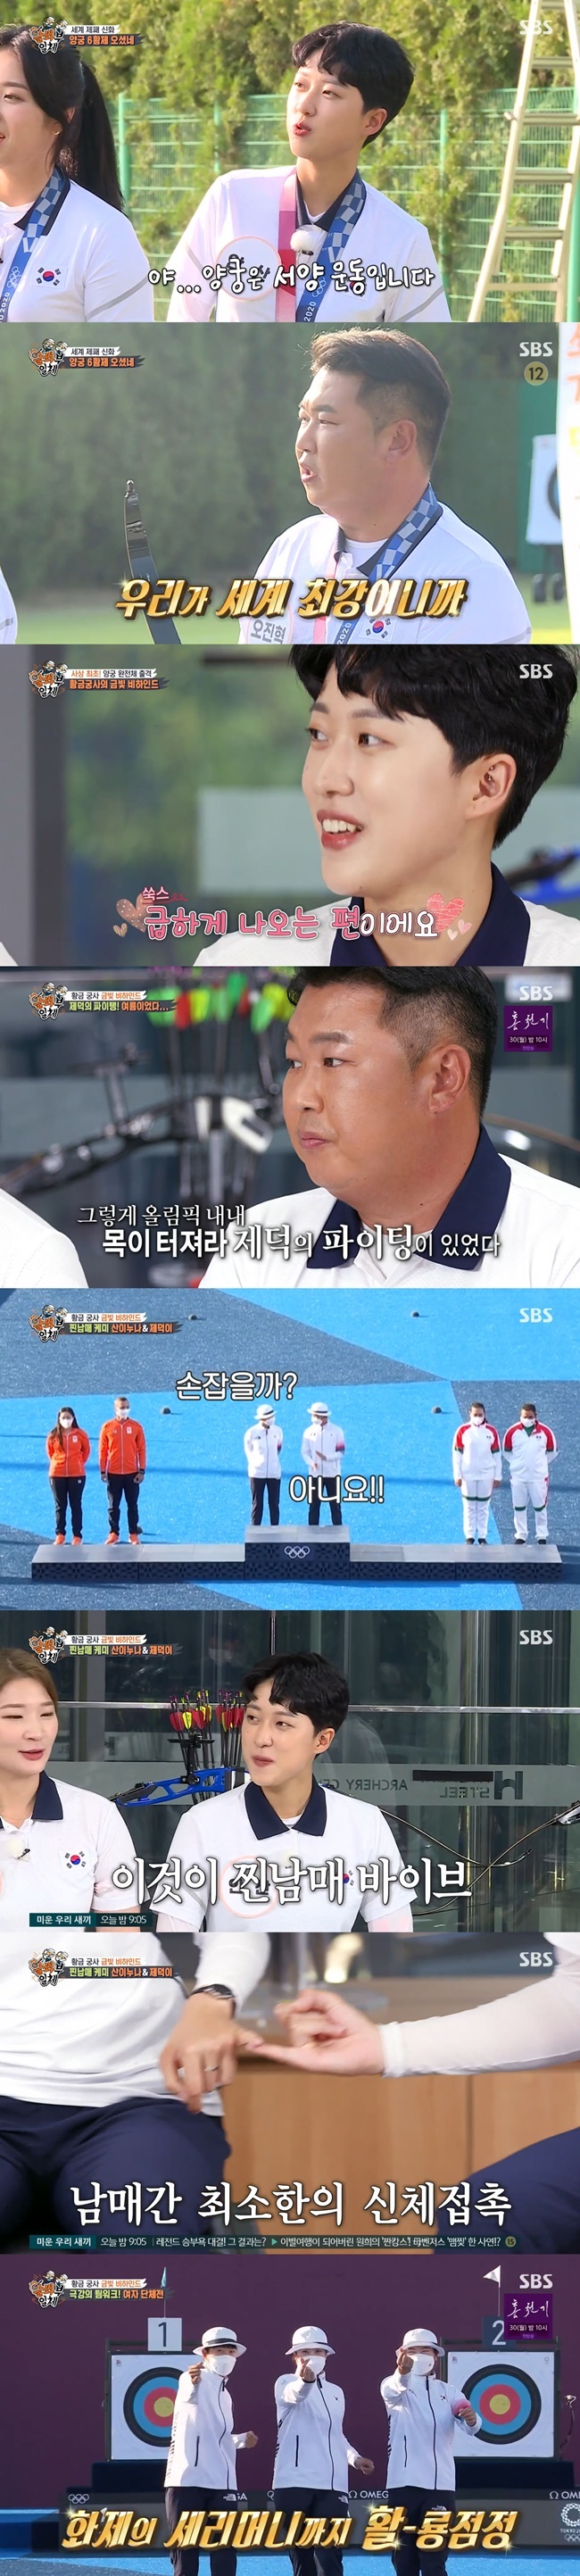 Kim je-deok reveals behind the archery hybrid awards.On SBS All The Butlers broadcast on August 22, a special day was drawn with Taegeuk warriors who shined Korea in 2020 Tokyo Organizing Committee of the Olympic and.When the disciples Lee Seung-gi, Yang Se-hyeong and Yoo Soo-bin appeared on the day, the archery masters fired with arrows and replaced the welcome greetings.Especially, the first time that the art was performed, the first time the art was performed by the emperor, and the youngest Kim je-deok participated in the recording on the day of the self-discipline.Lee Seung-gi, who appeared in the Hwarang: The Poet Warrior Youth makeup, said, The beginning of archery history is Hwarang: The Poet Warrior Youth.However, the masters of archery corrected its a foreign sport and archery is a Western movement; the bewildered Lee Seung-gi said, Its an archery because its a Western bow.So it is called the national palace, he said. I always thought it was a Korean event because I always won medals in South Korea. Oh Jin-Hyek laughed, The beginning was there, but lets say that our country is the strongest in World, so lets turn it off in Korea.The production team then began measuring the heart rate in real time to masters and disciples.Kim Woo-jin, who earned the nickname sleep kungya with a calm heart rate throughout the game, was the only one in his early 70s to keep his eyes on BPM.Lee Seung-gi, who saw this, admired it, I will fall to my 60s soon.I feel a lot of pressure, Anshan confessed of the archery match in South Korea, which was focused on former Worlds.When Lee Seung-gi asked, How do you win three gold medals? Anshan quipped, I think Im a greedy person.Anshan also said, Now, when I go to a restaurant or cafe, I find out a lot, so I come out in a hurry to hurt others.Yang Se-hyeong advised, Enjoy like a victory.In addition, the 2020 Tokyo Organizing Committee of the Olympic and Behind was delivered.Kim je-deok said, When I went up to the Awards after the mixed sex, Anshan said, What do we do? I said no.I was ashamed, he said, boasting of his steamy brother and sister.I made a little mistake in the mixed race, and every time I did it, it helped because Kim je-deok led me in front with a high score, Anshan said.Kim je-deok replied, Thank you for leading Anshan to calmly lower me because I am excited.However, the two avoided their gaze at the suggestion that they should face each other and express their gratitude, and only the pinkies were caught together and caused laughter.Kim je-deok said of the 2020 Tokyo Organizing Committee of the Olympic and the later days of vigorously shouting fighting throughout, The Olympics were so nervous to shout inside.I asked the coach of the national team to relax, Can I shout? He said, I am comfortable, but I do not want to hurt my opponent.In particular, Kim je-deoks fighting was famous in Jincheon Athletic Village since 2020 Tokyo Organizing Committee of the Olympic and the previous days.Oh Jin-Hyek said, I was embarrassed because I did not have a player shouting the fight. After that, Kim je-deoks fighting lowered the tension.I asked Kim je-deok, Can you shout fighting at the Olympics? I told the teachers that I used it as a strategy and routine to lower the tension.In addition, Anshan commented on the gold medal medal of the womens archery team award, The short track womens team performance was so cute and cool at the 2018 Pyeongchang Winter Olympics.I wanted to try the ceremony when I climbed the podium, so I followed what Minhee (Jang) did, he said. I asked him, Are you really doing it?Kang Chae-young showed off his youngest love, saying, If you want to do it, you should do it.